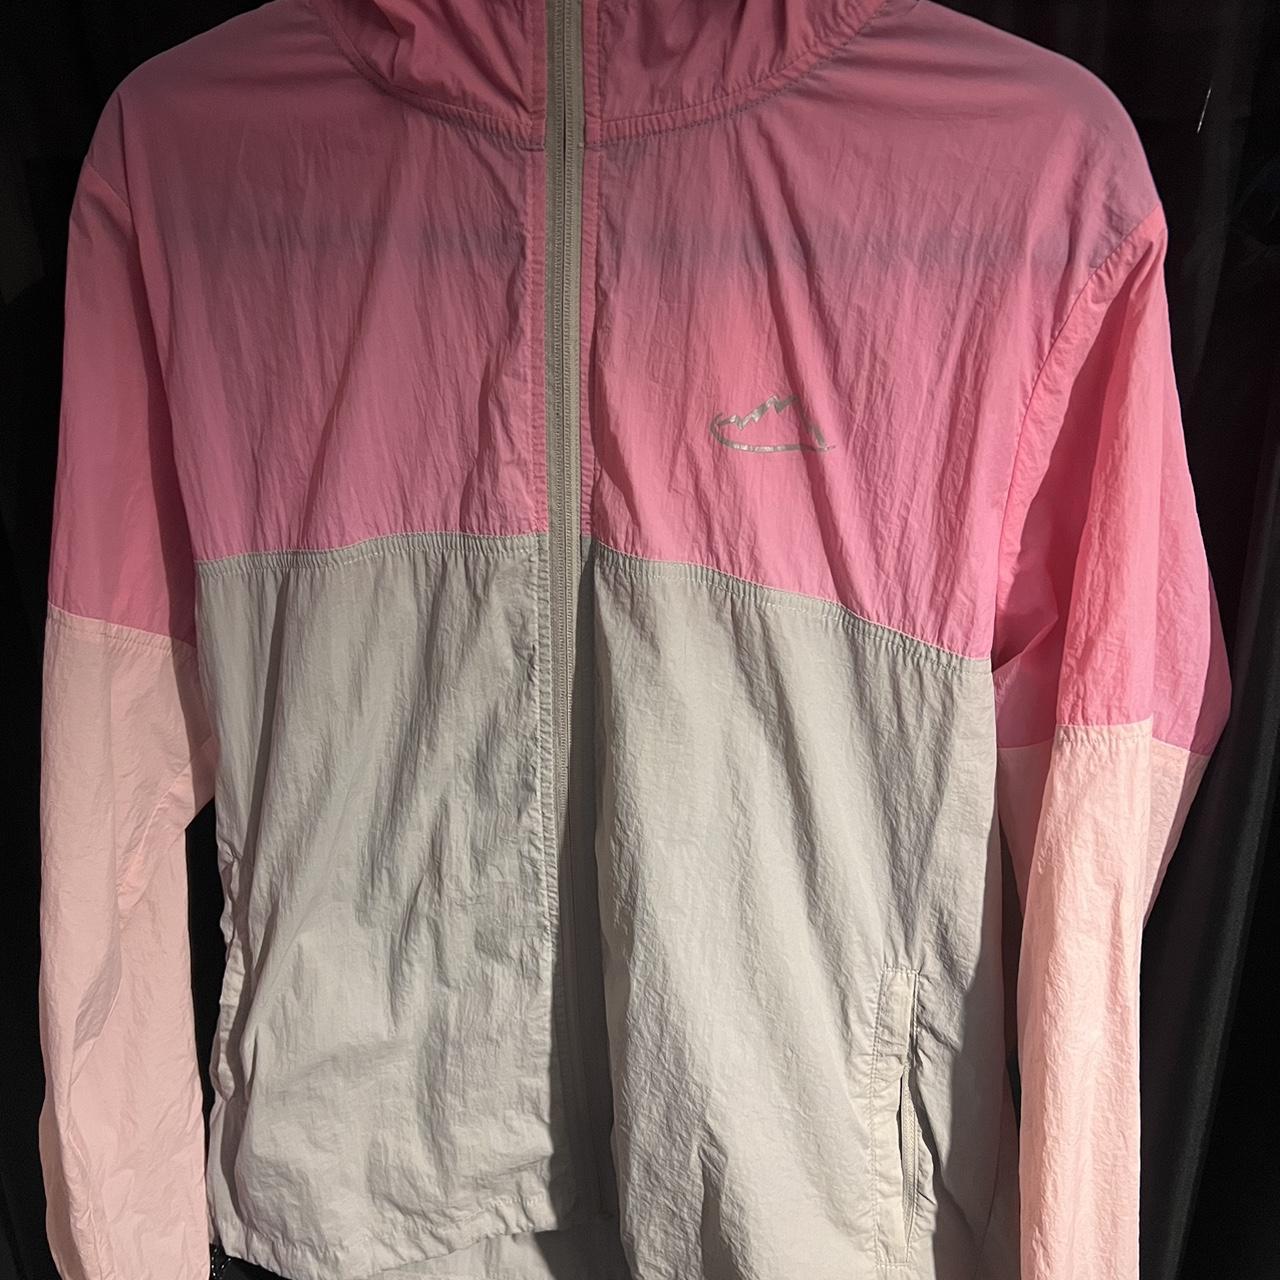 Do any of y'all own t he pack it down jacket (preferably in pink mist)?  I've been debating between this and the another mile jacket 🙈 I also have  no idea what